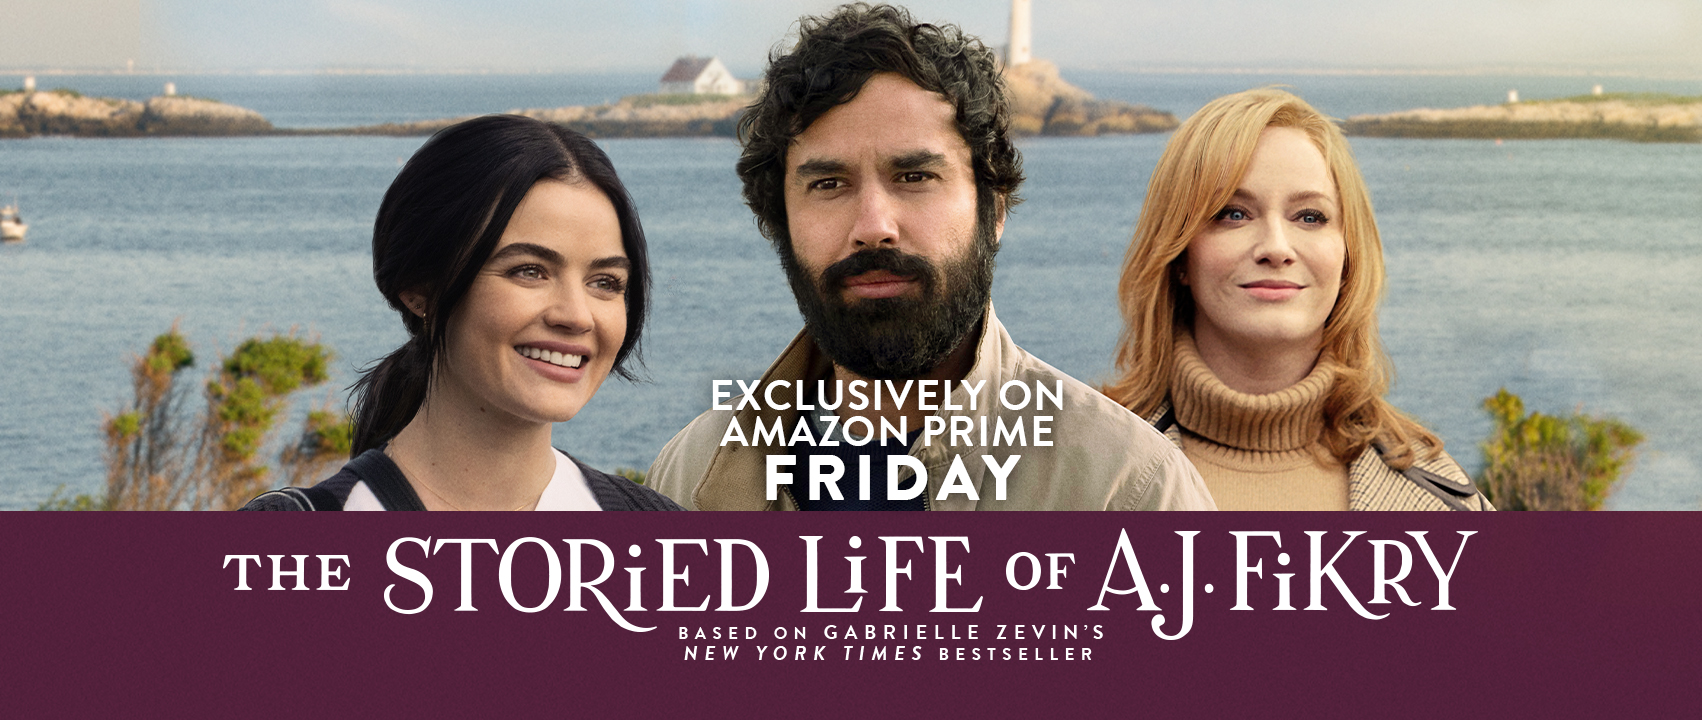 THE STORIED LIFE OF A.J. FIKRY to Debut Exclusively on Amazon Prime Video October 28